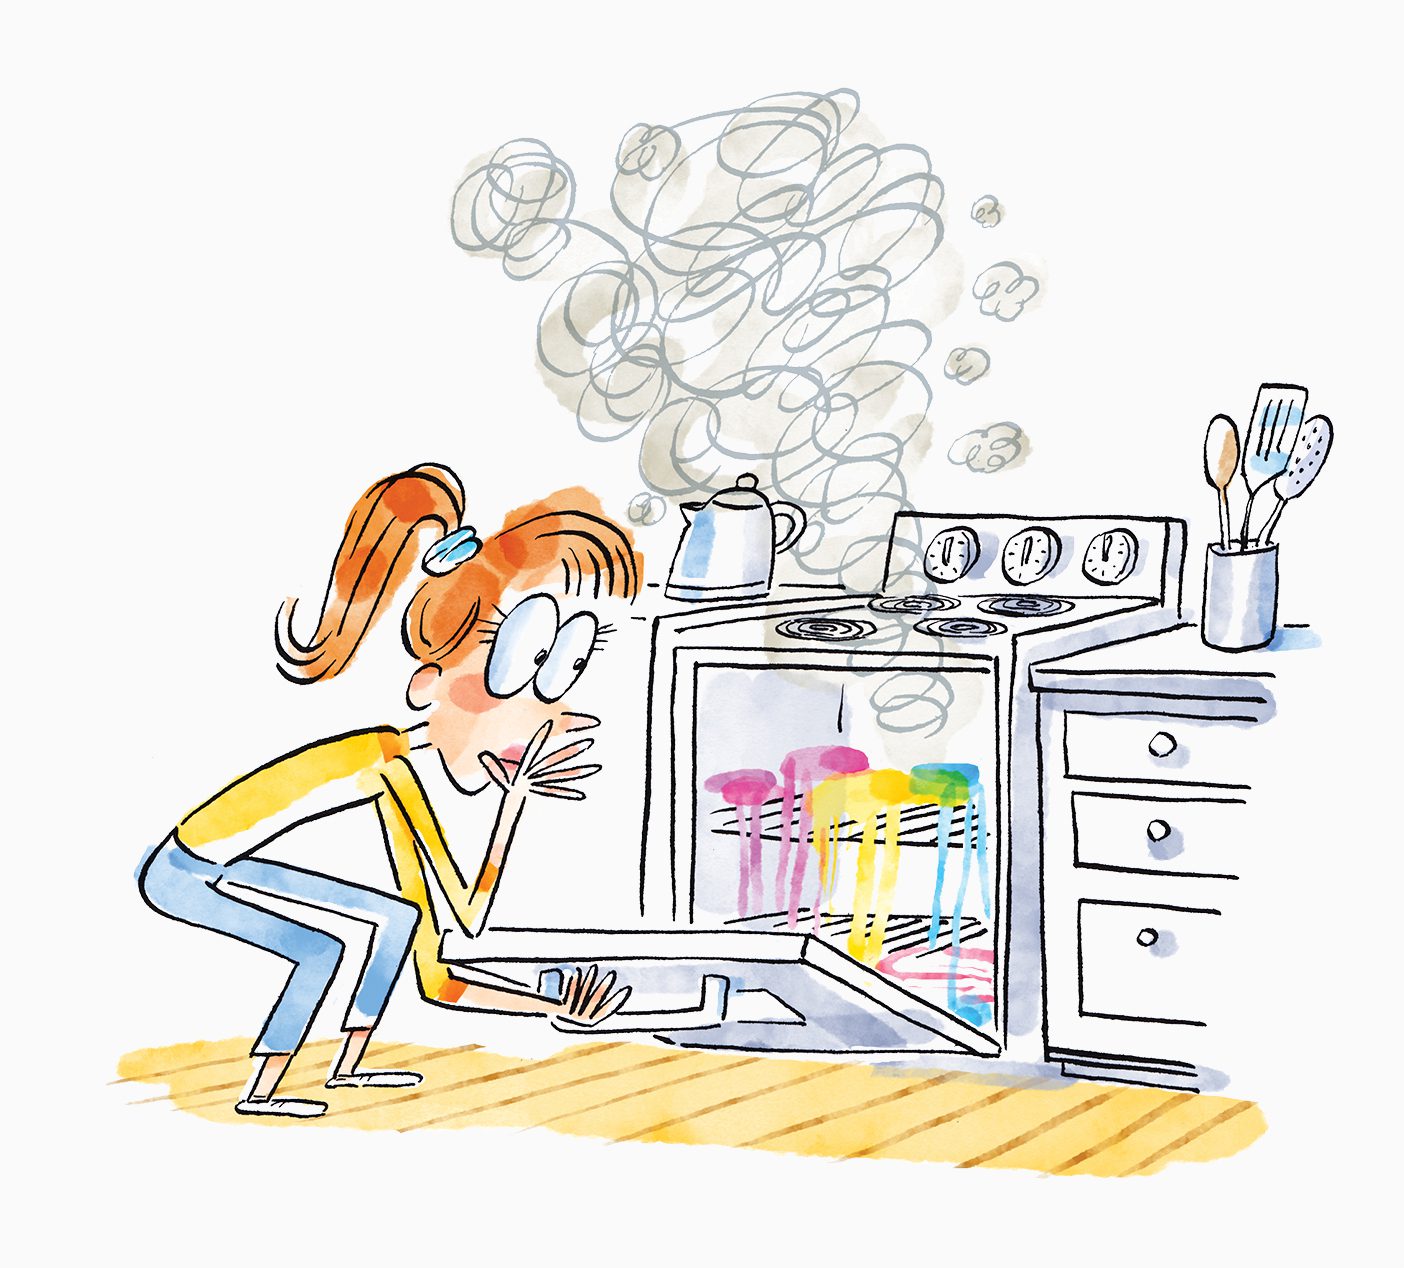 An illustration of female student opening the smoking stove to find a melting mass of rainbow colored plastic.